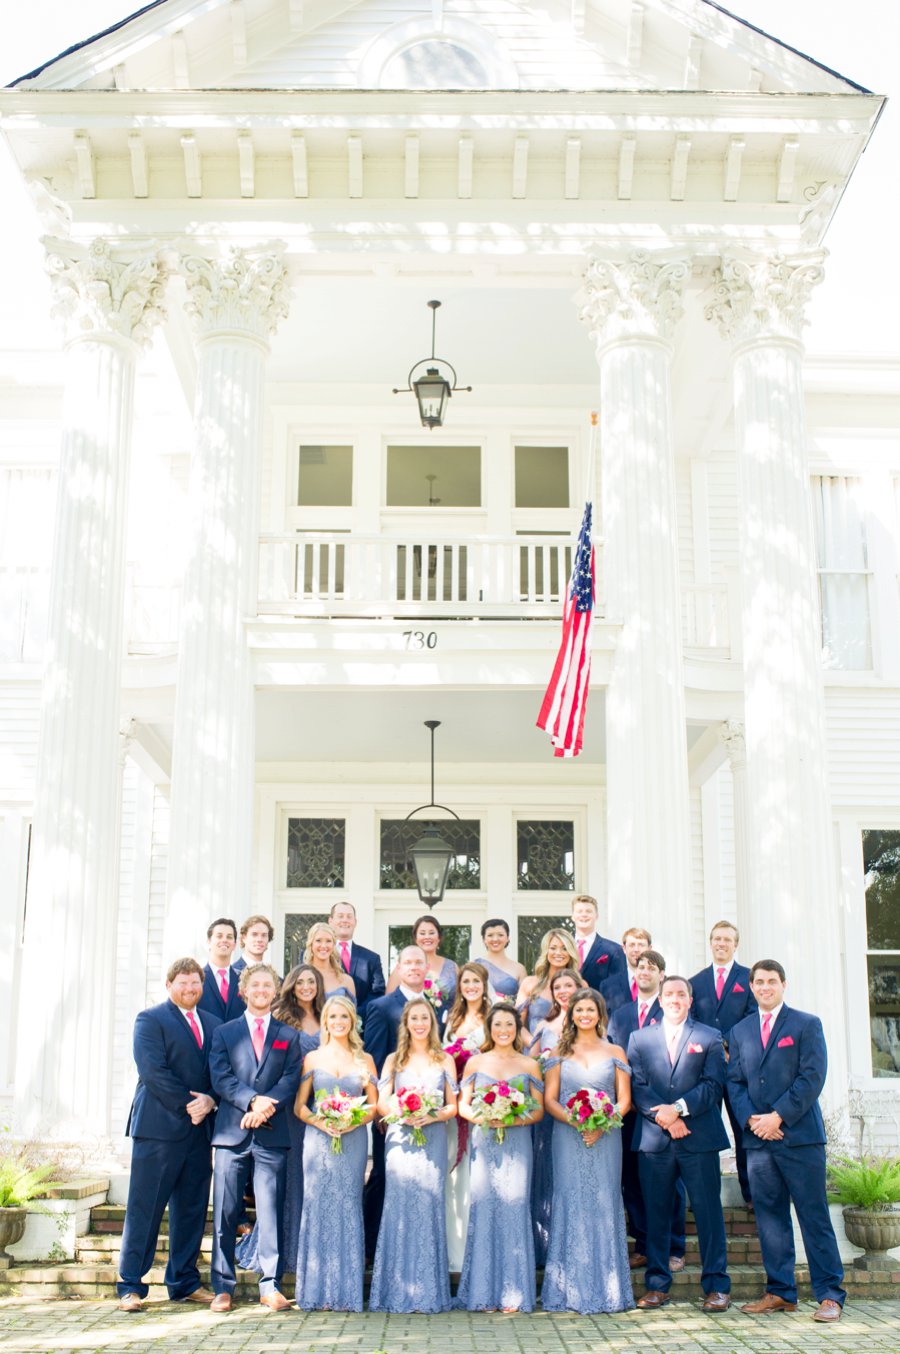 Romantic Red, Pink, and Lavender Mississippi Wedding via TheELD.com